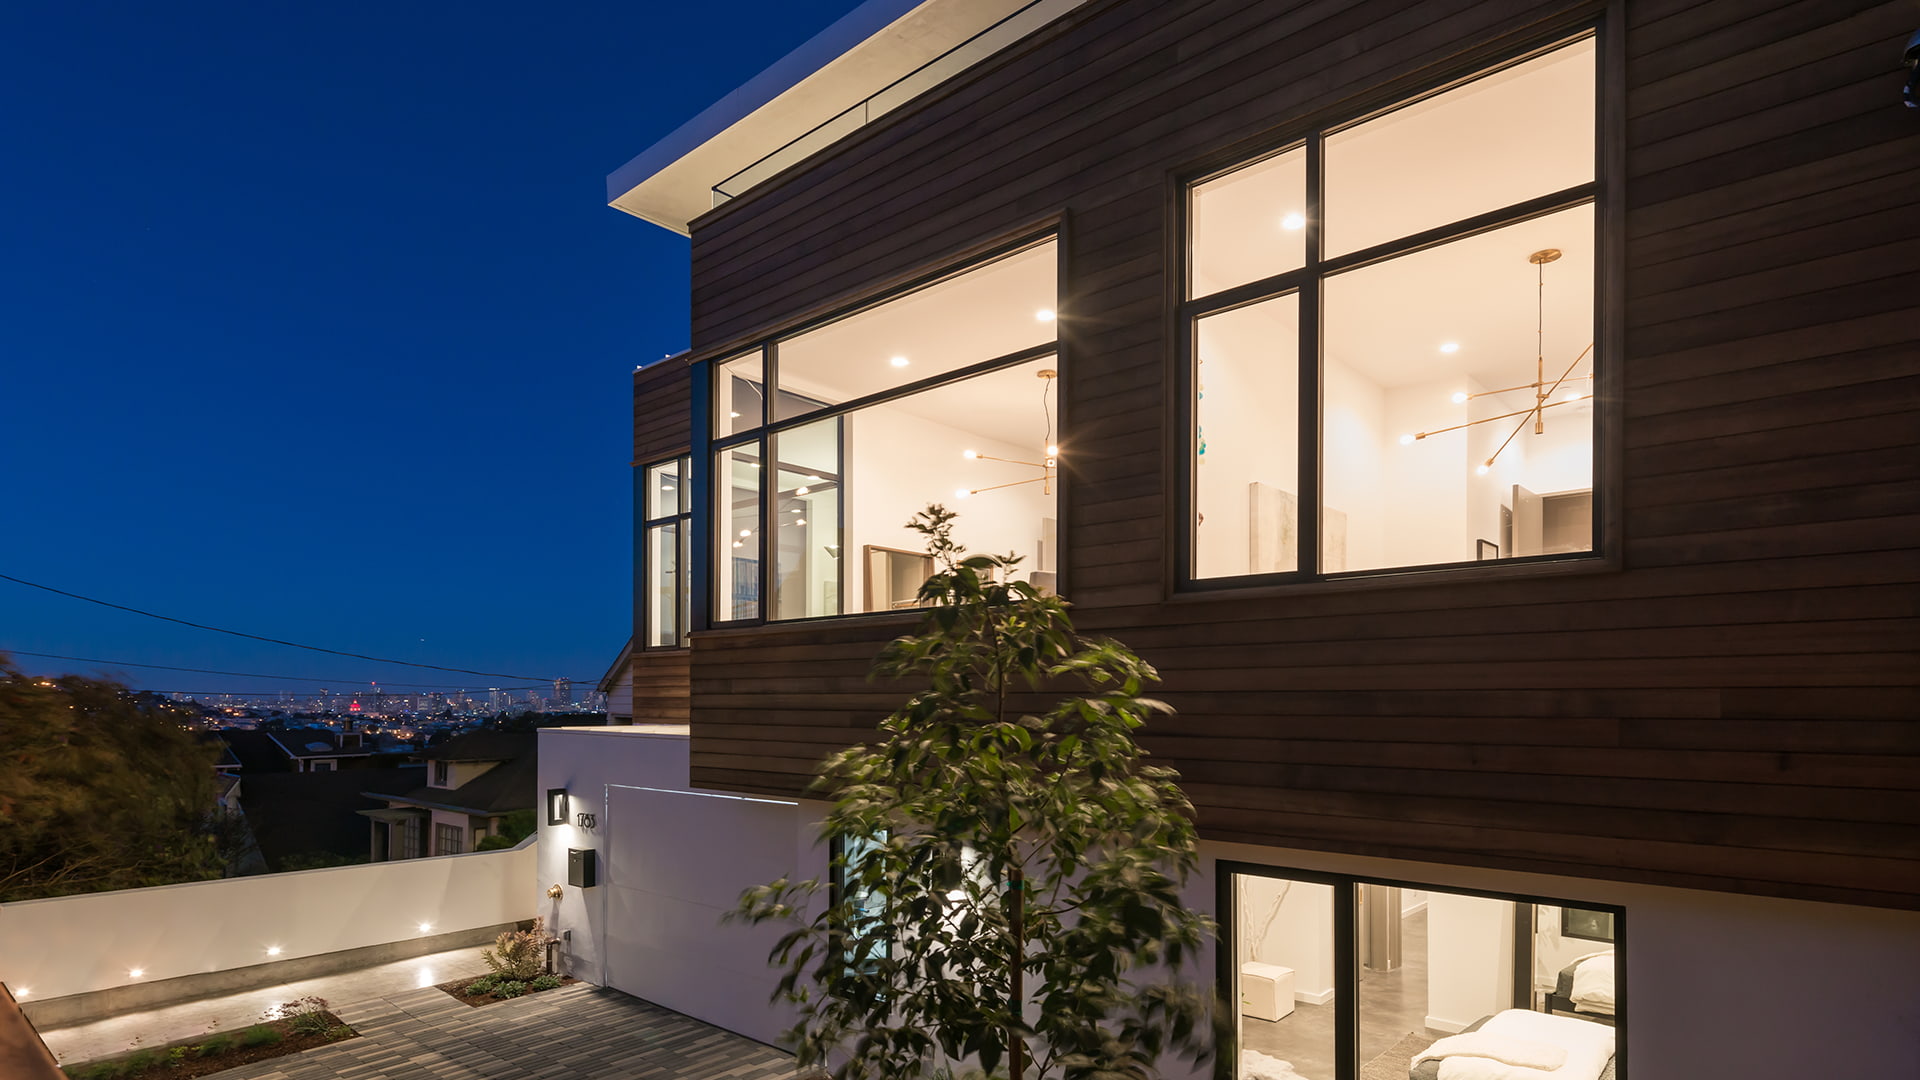 The side of a modern home viewed at night with the city skyline in the distance